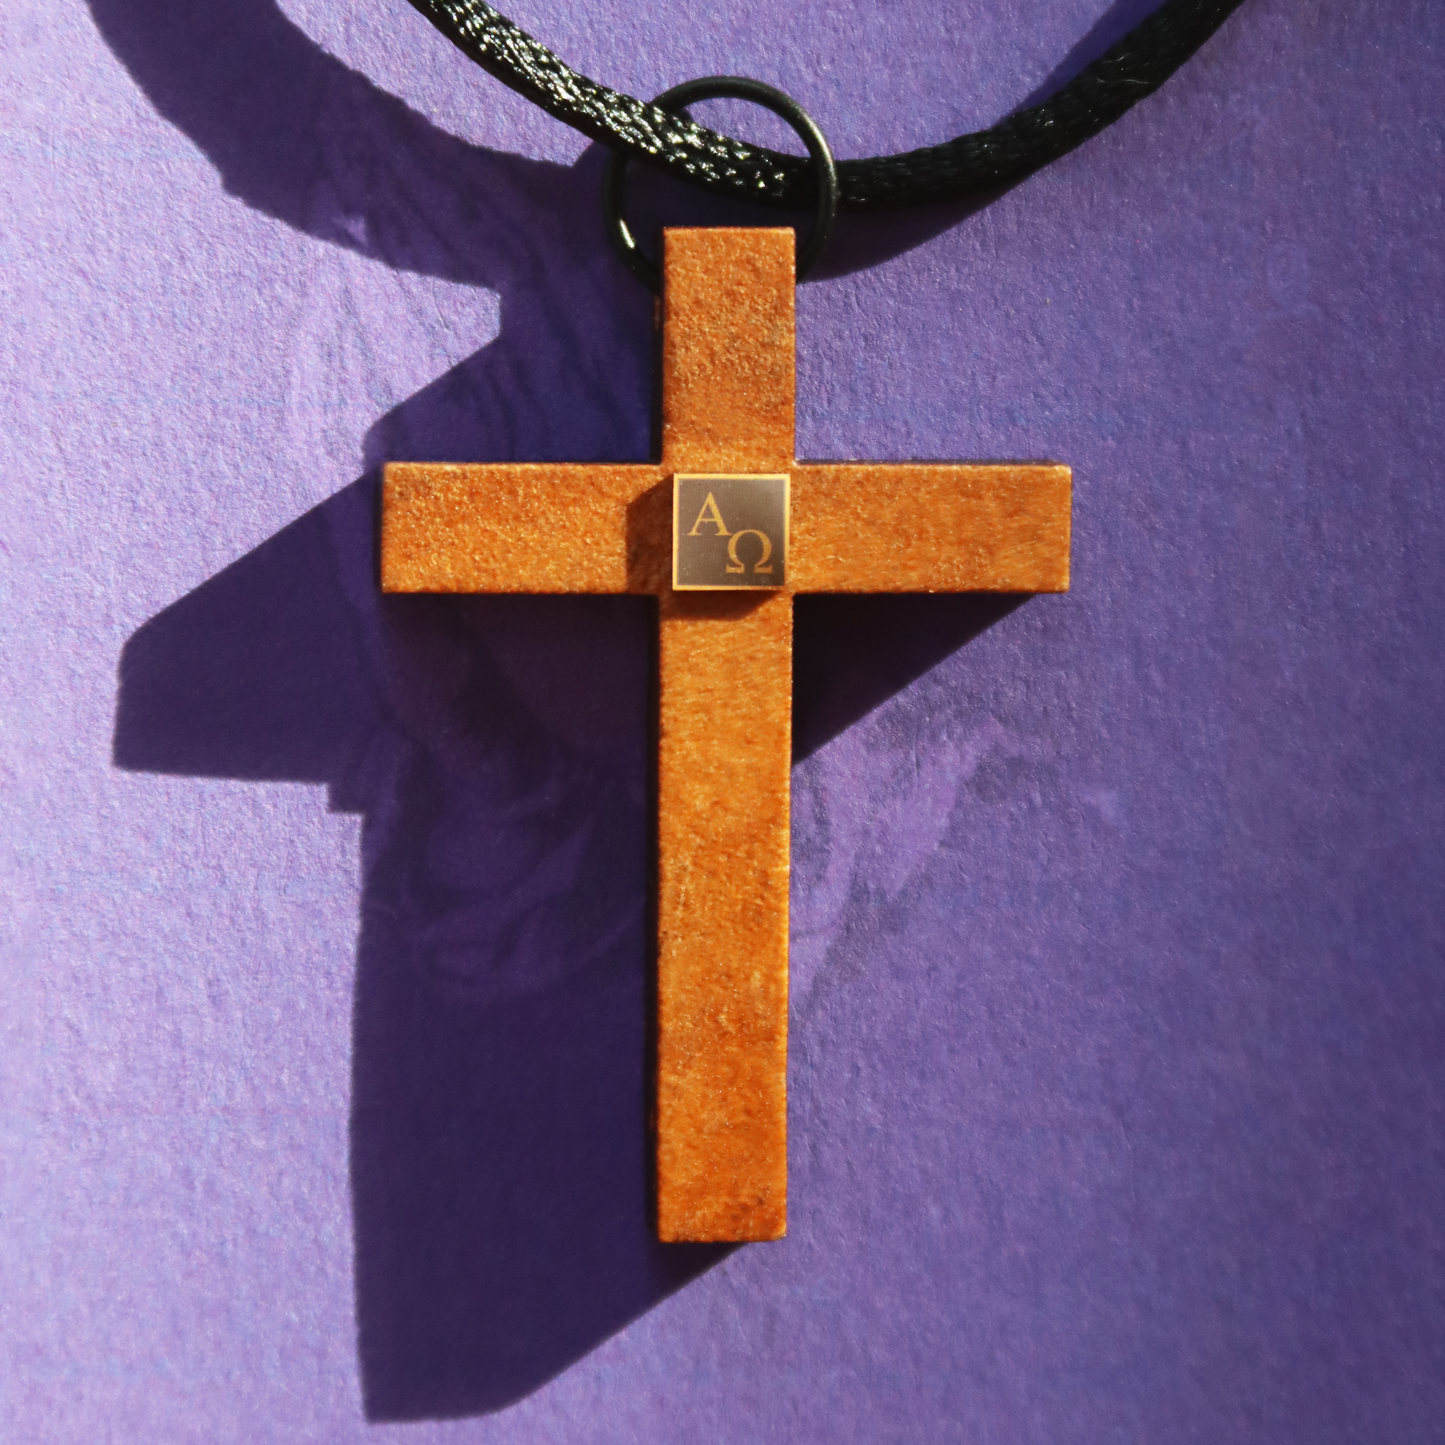 The New Testament Cross (Light Wood) Limited Edition